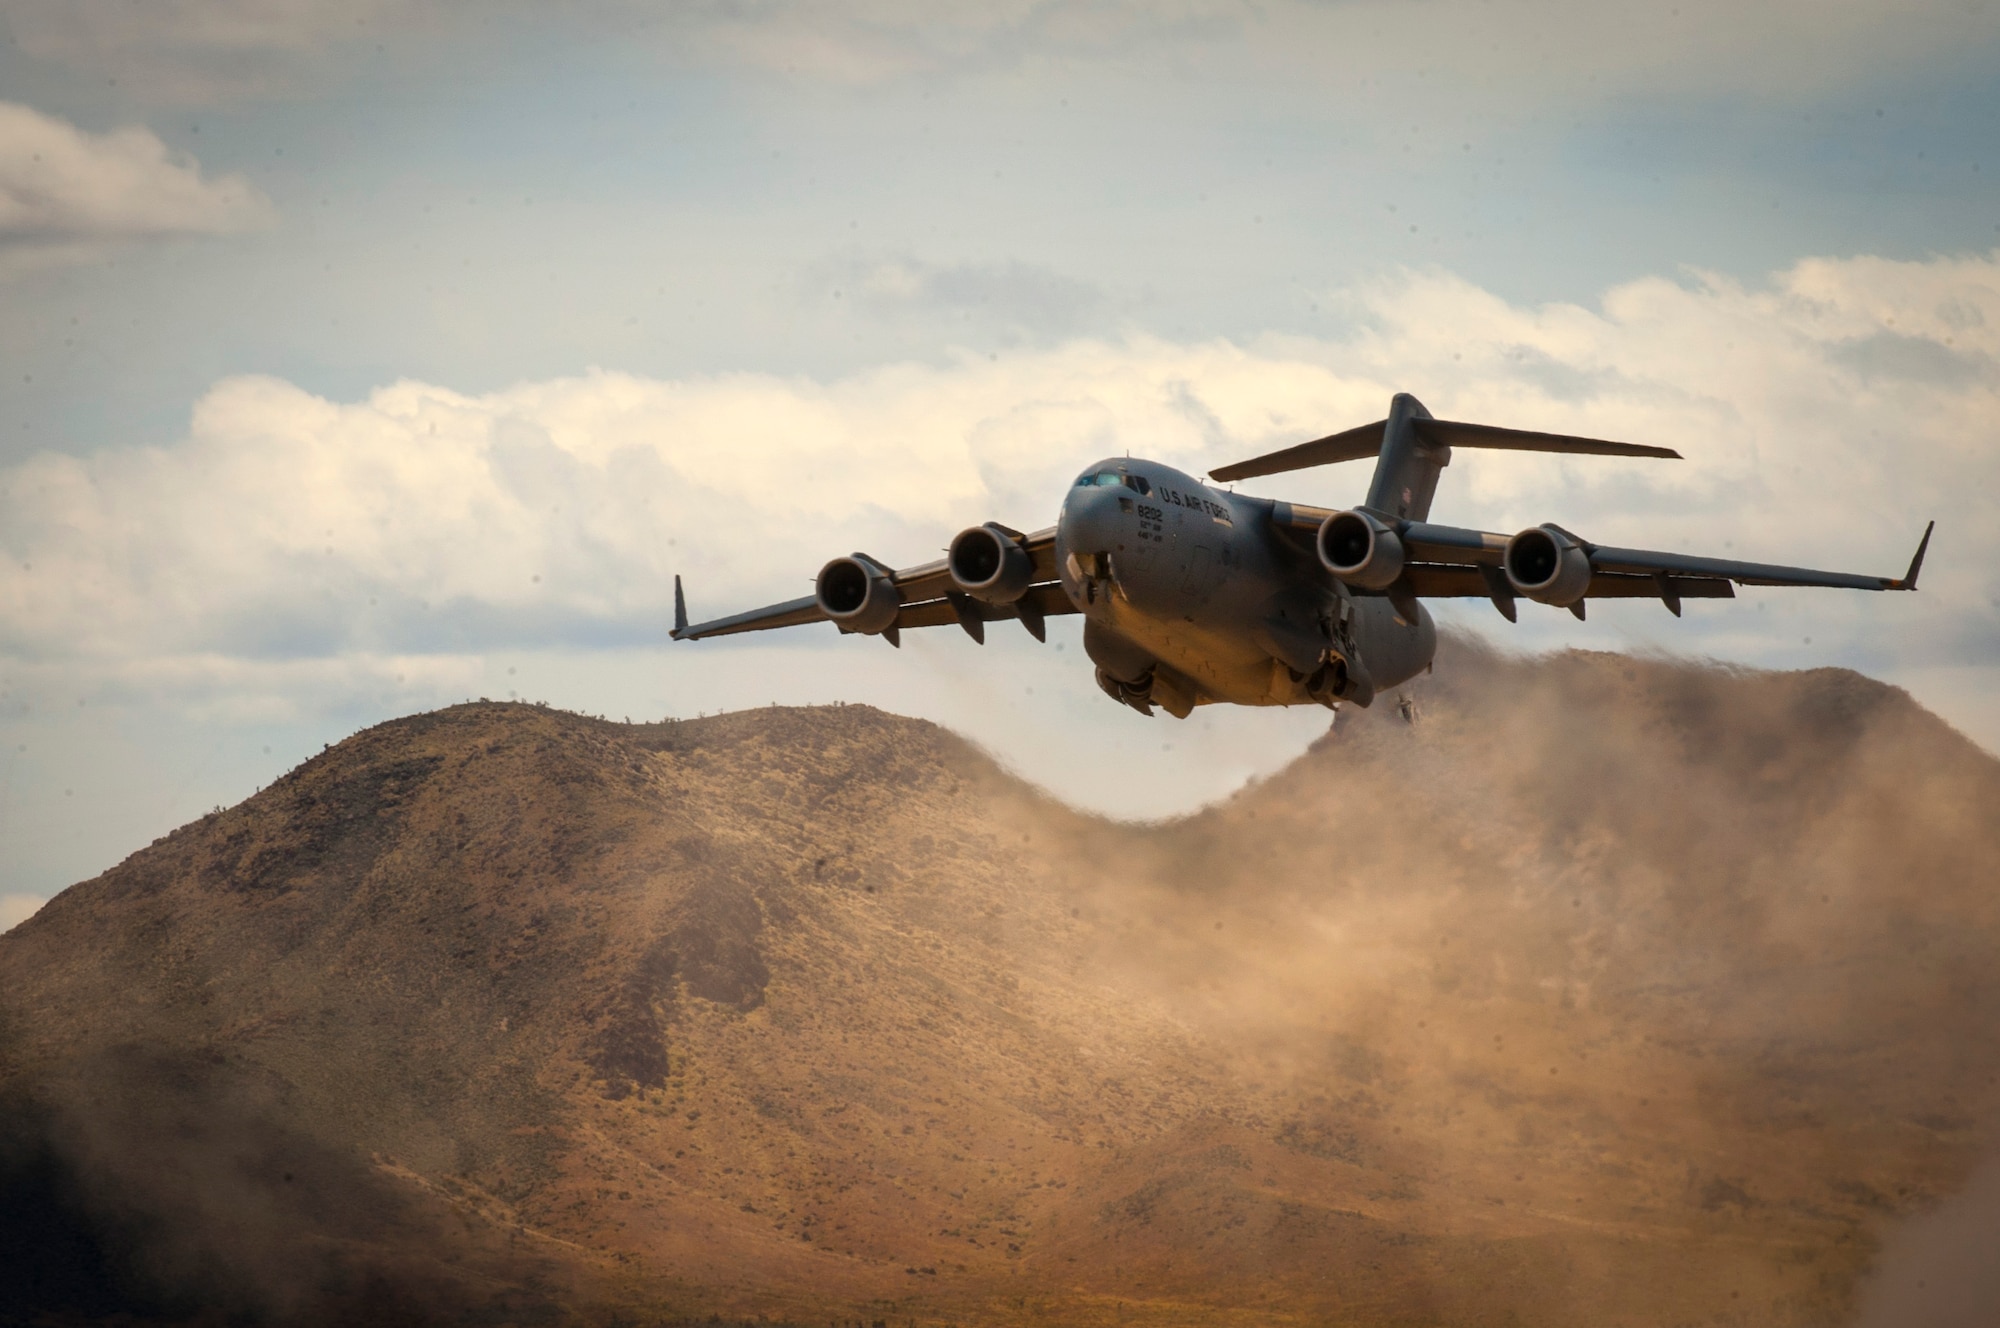 A C-17 Globemaster III cargo aircraft assigned to the 57th Weapons Squadron, U.S. Air Force Weapons School, Nellis Air Force Base, Nev., takes off from a dry lake bed during a composite mission application exercise at the Nevada Test and Training Range, April 24, 2017. The training scenario required an aeromedical evacuation of a combat casualty via a C-17. (U.S. Air Force photo by Senior Airman Joshua Kleinholz/Released)